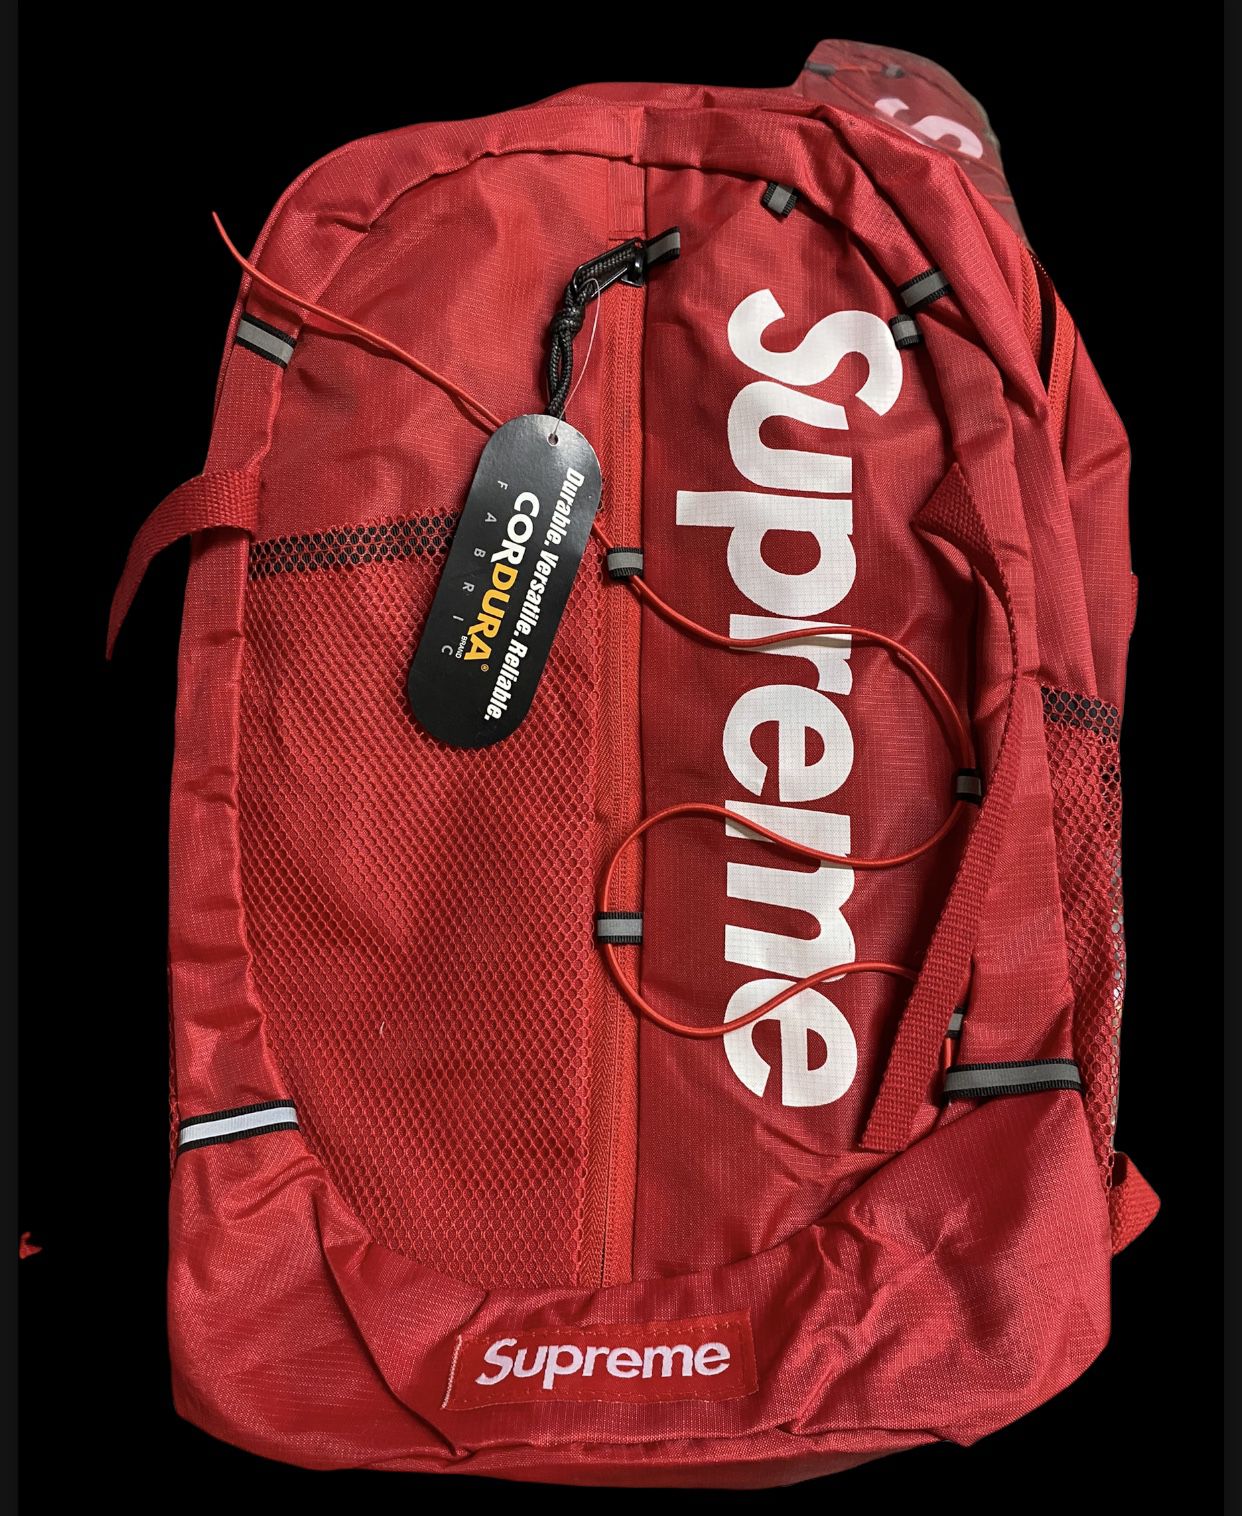 Hypebeast supreme ss17 backpack for men and women work gym school travel bookbag RED OR BLACK available